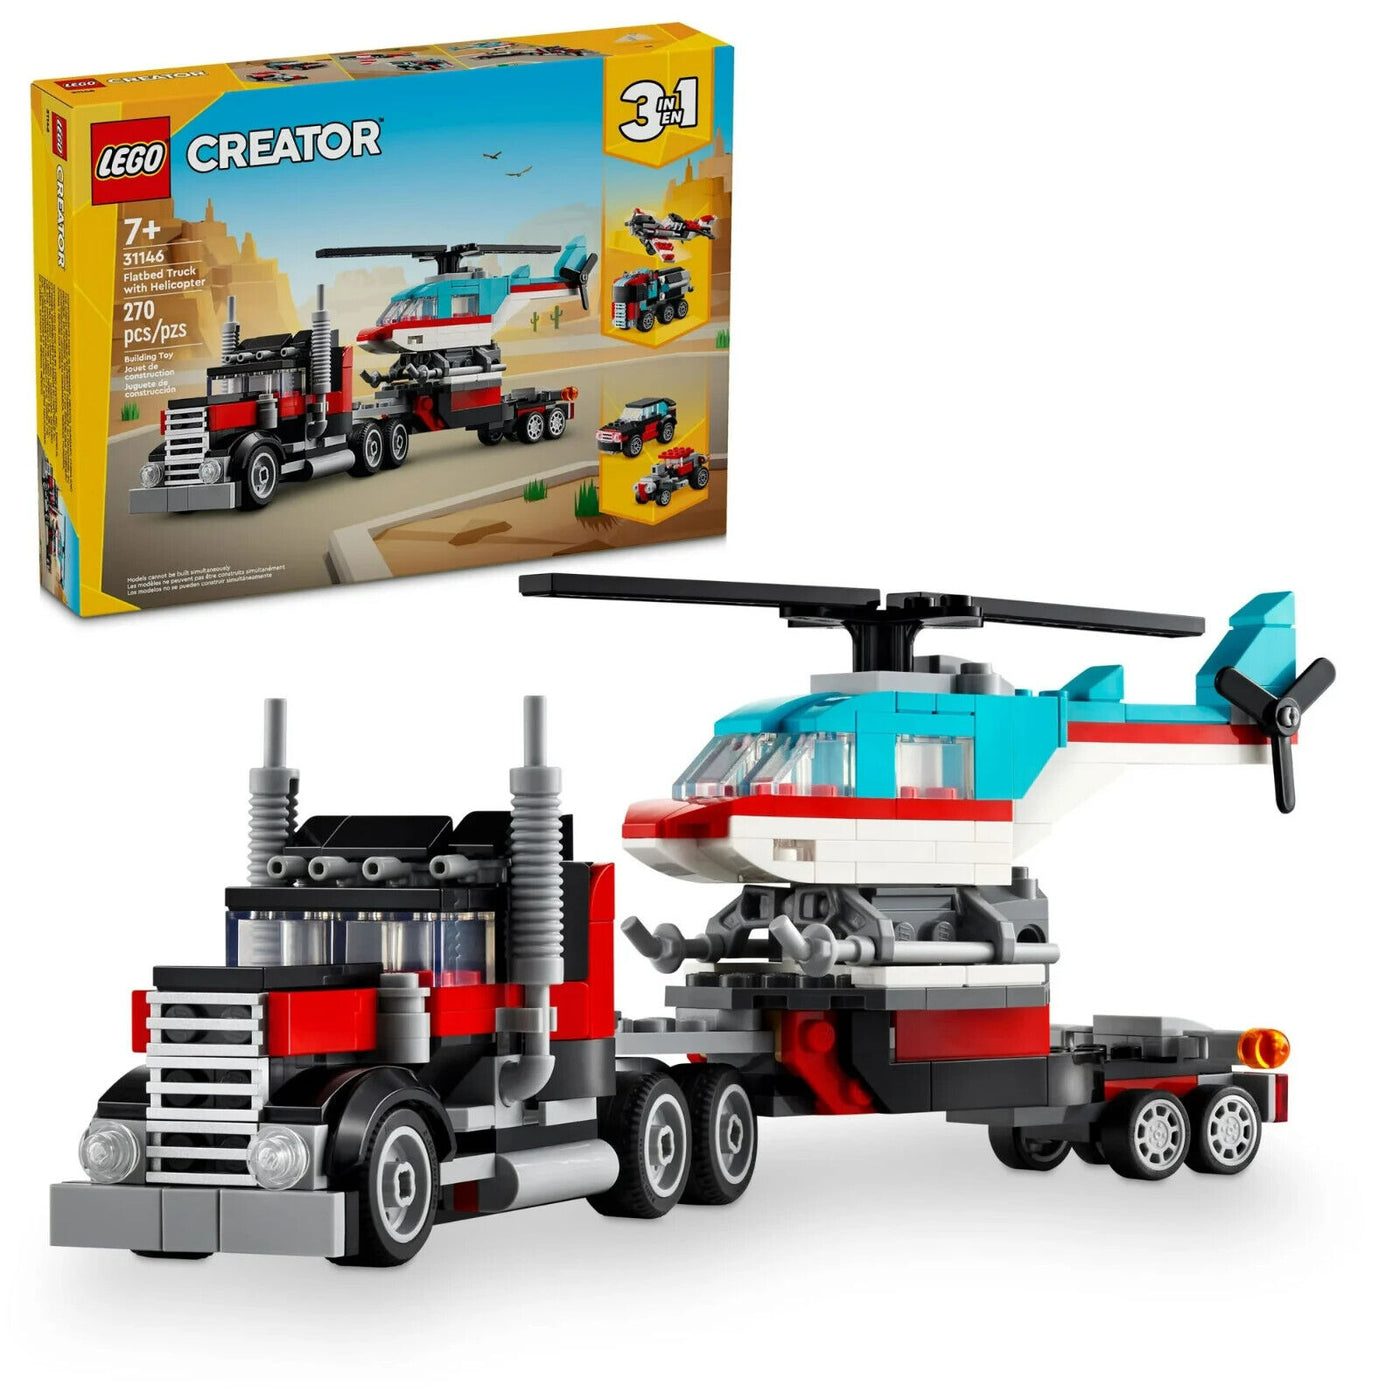 Flatbed Truck with Helicopter LEGO 31146